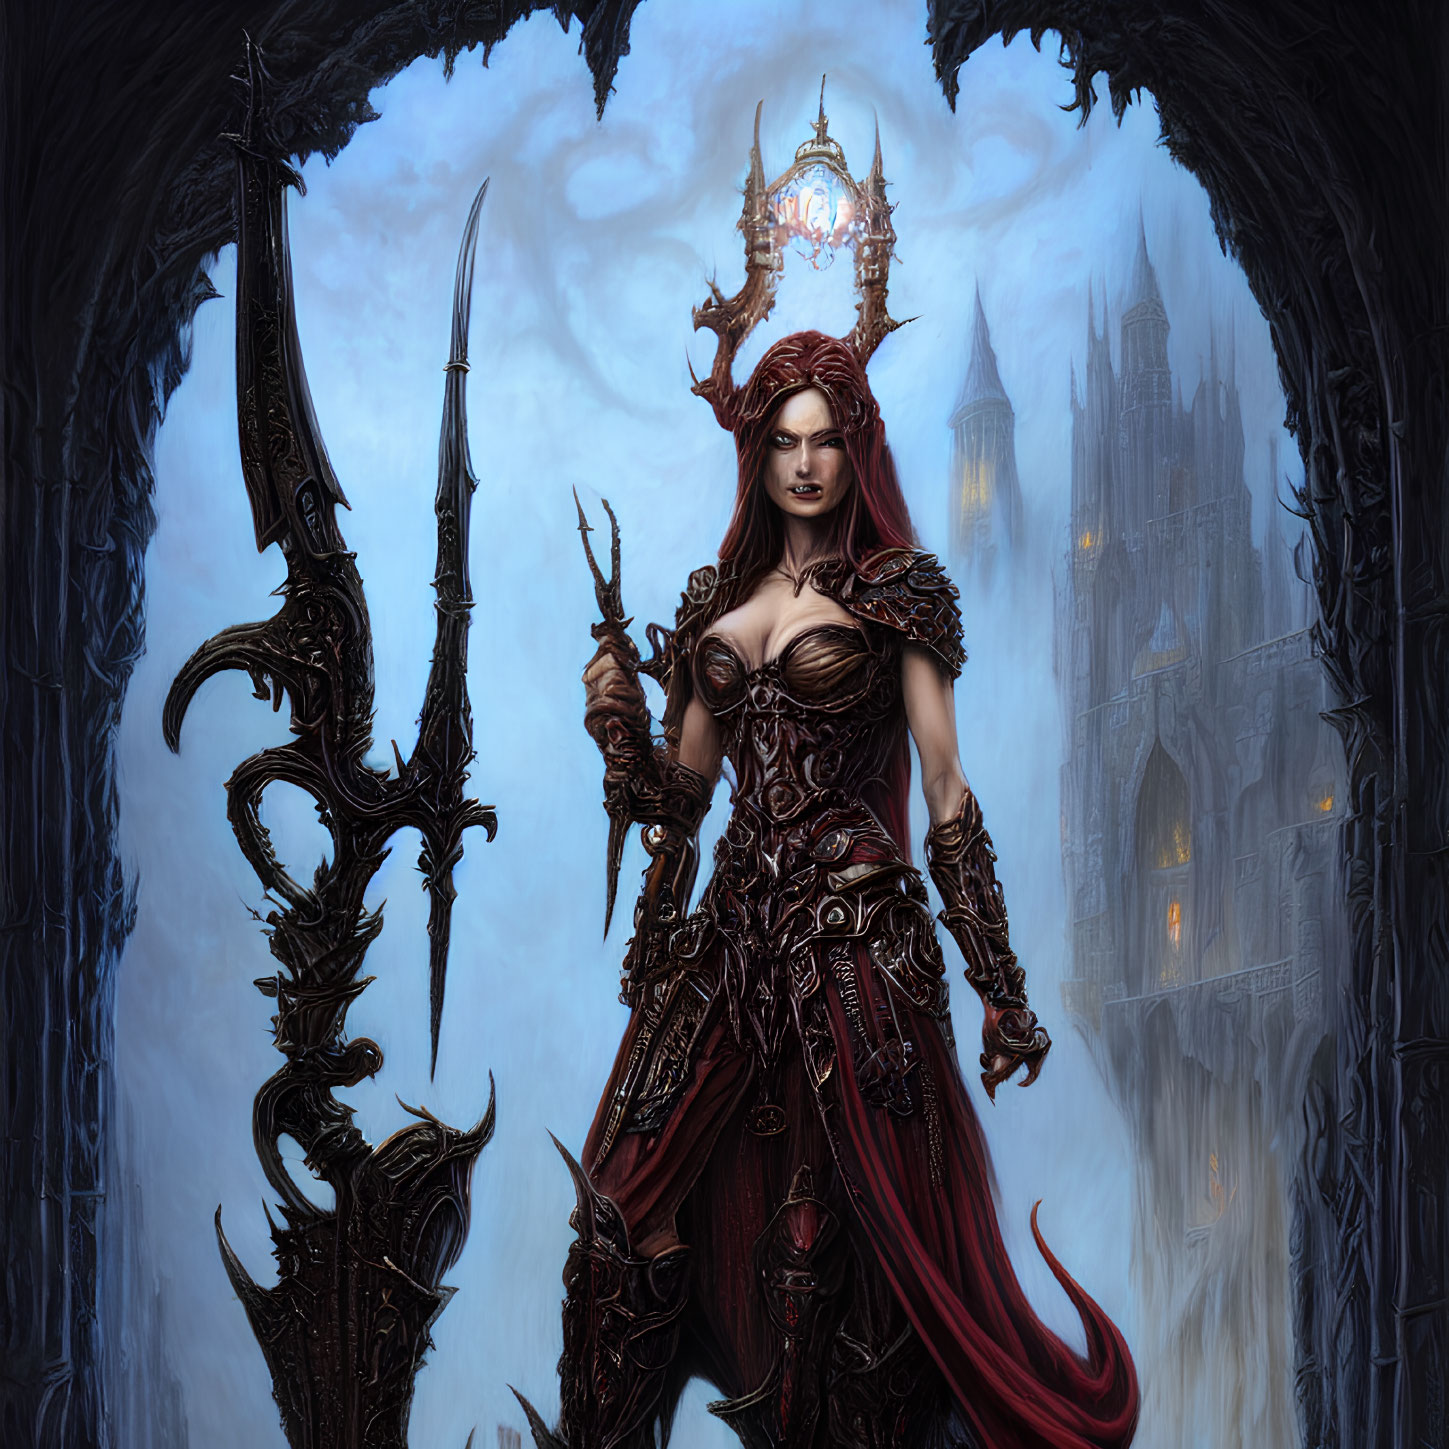 Red-Haired Warrior Woman in Ornate Armor Holding Spear and Staff in Gothic Archway